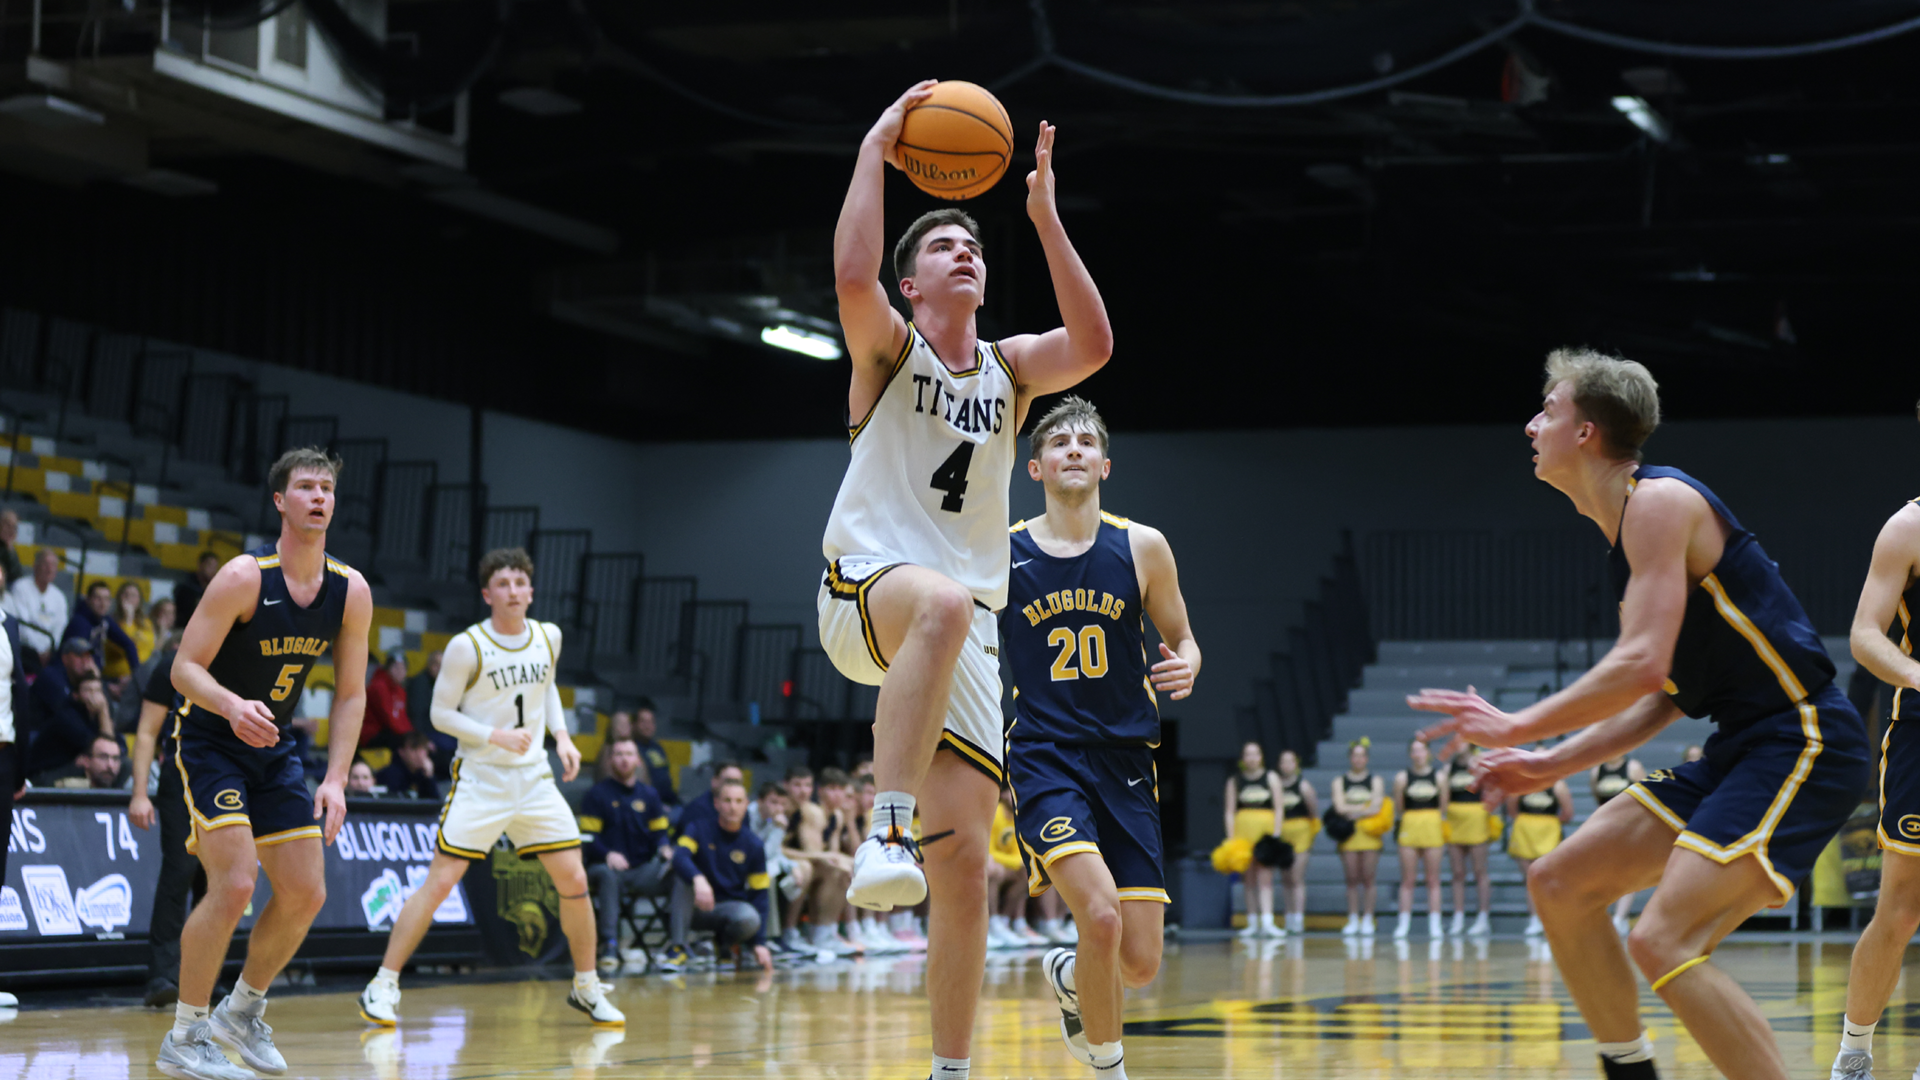 Michael Metcalf-Grassman scored a team season-high 34 points against the Blugolds on Saturday night.